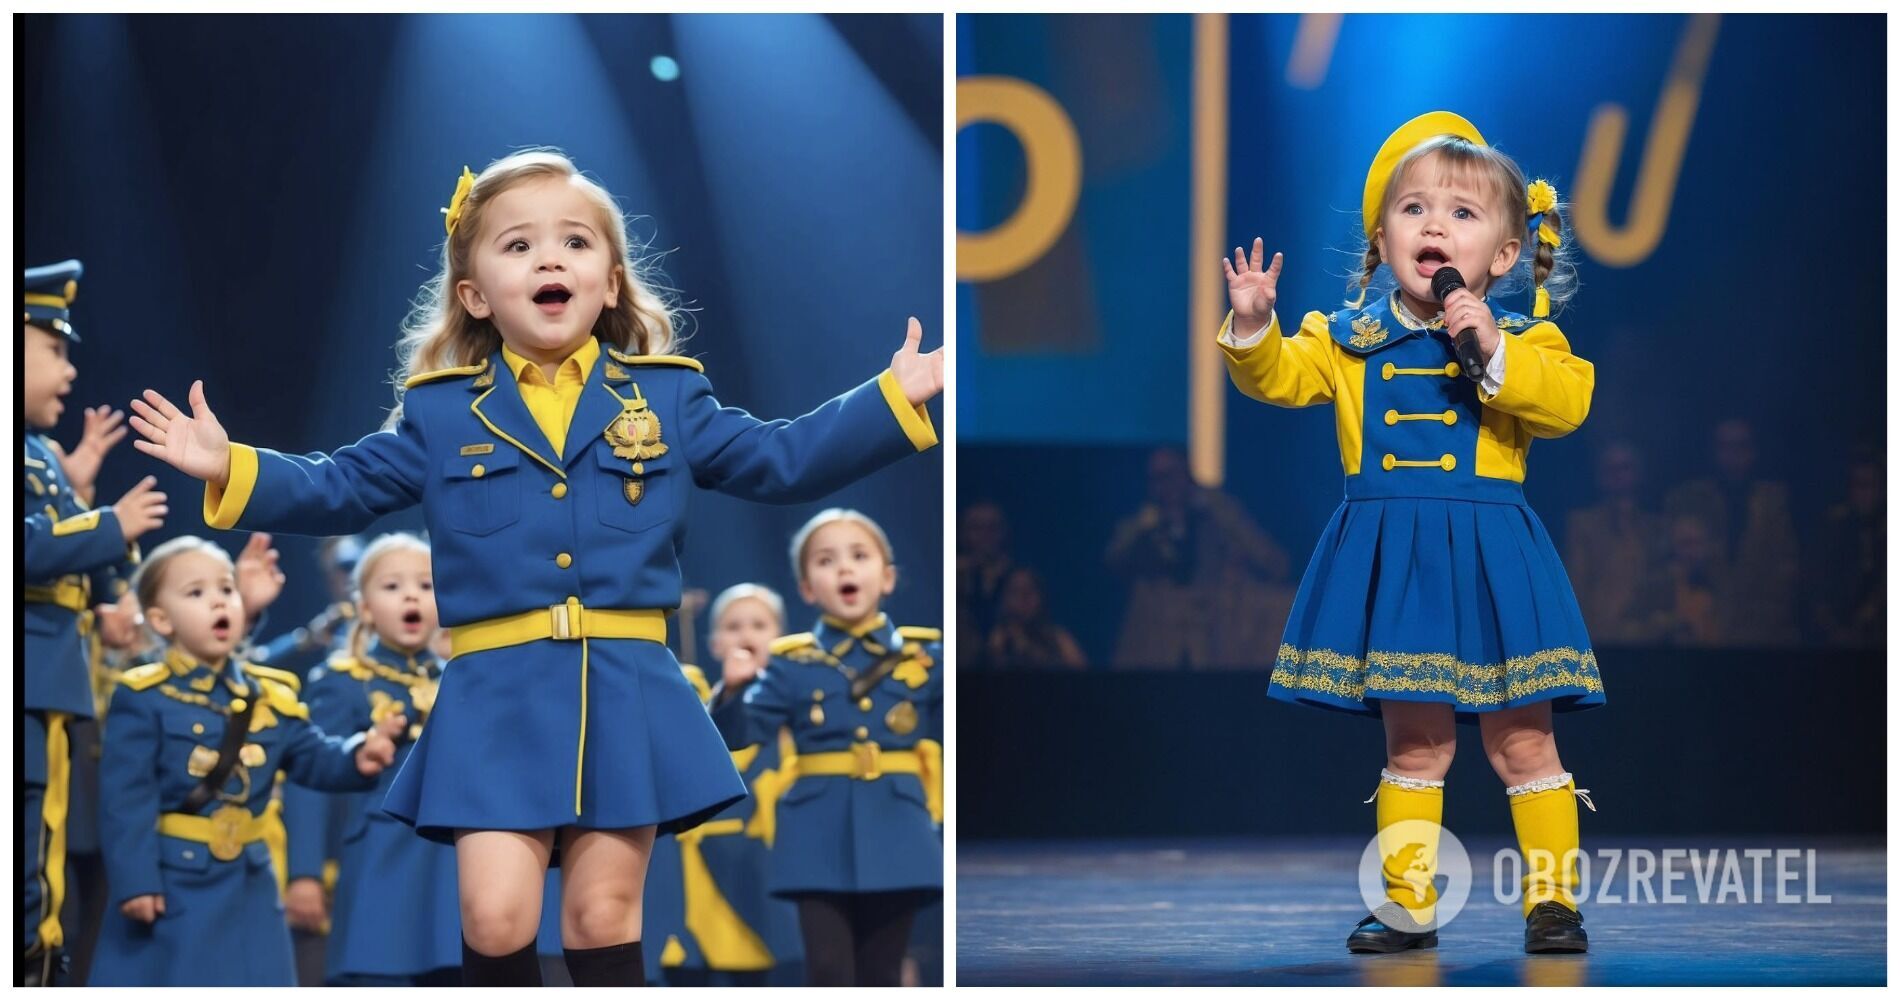 Beware, AI! Ukrainians have fallen for another fake with children: photos of girls in blue and yellow uniforms are being shared online